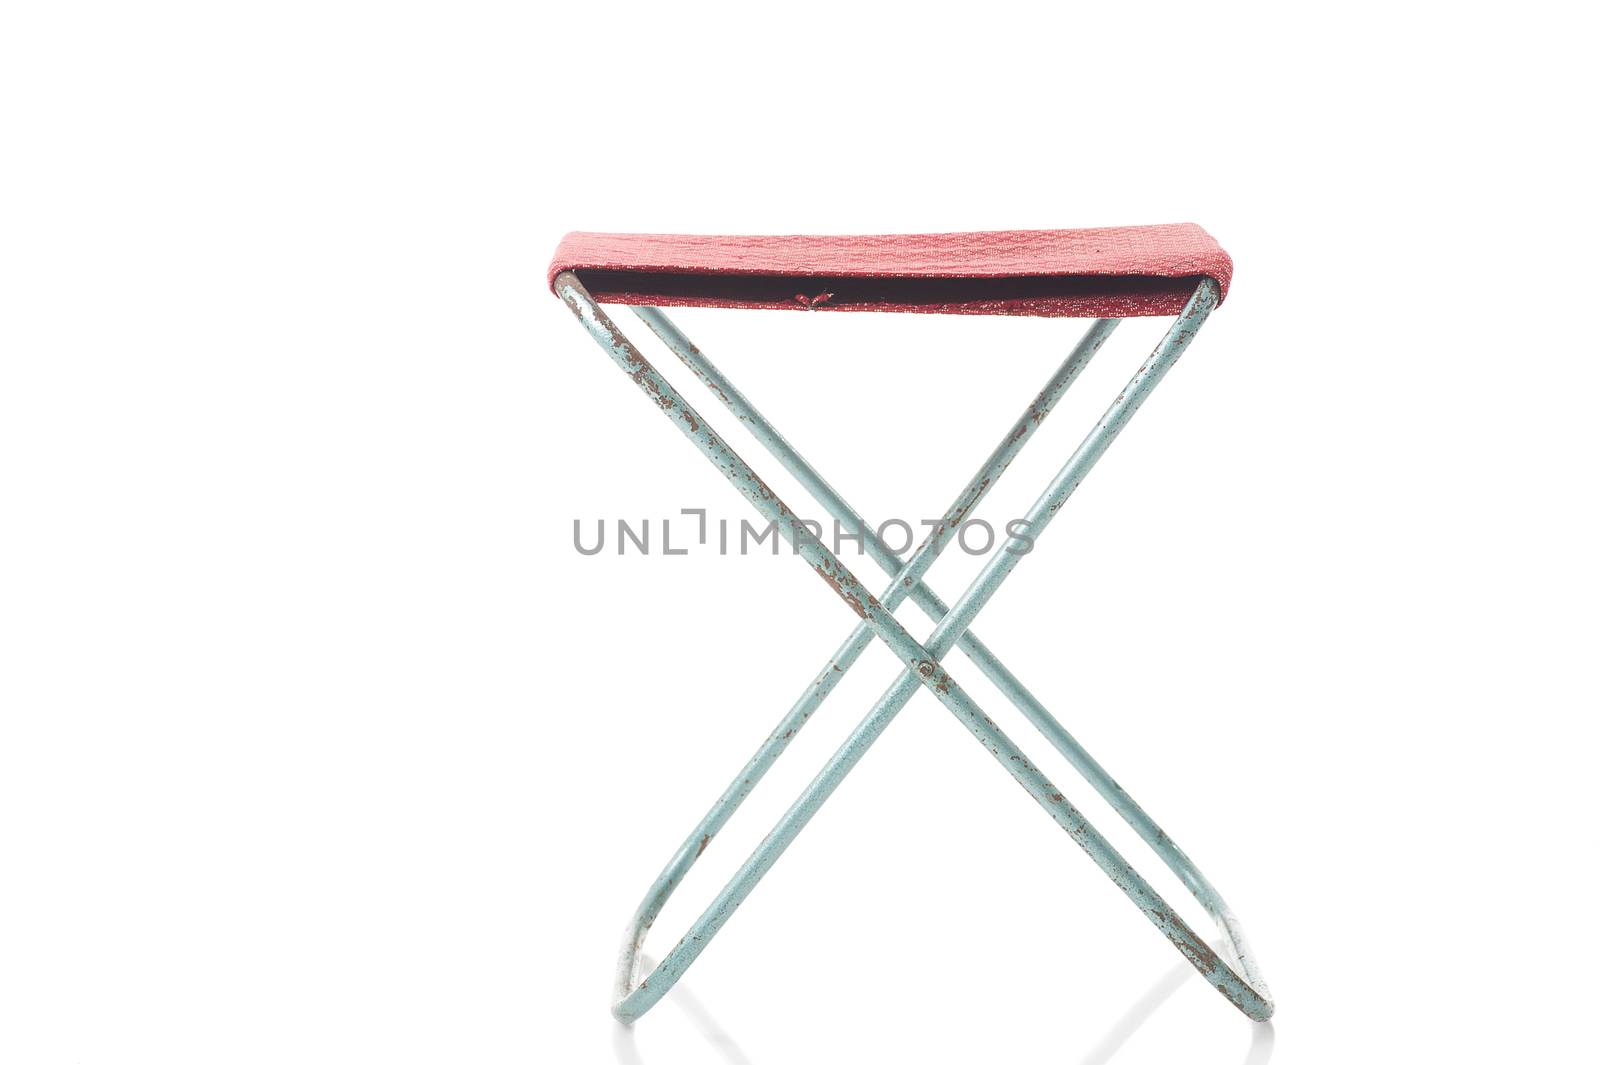 Simple folding canvas stool with a textile seat standing open, front view isolated on white, portable for use at picnics and camping